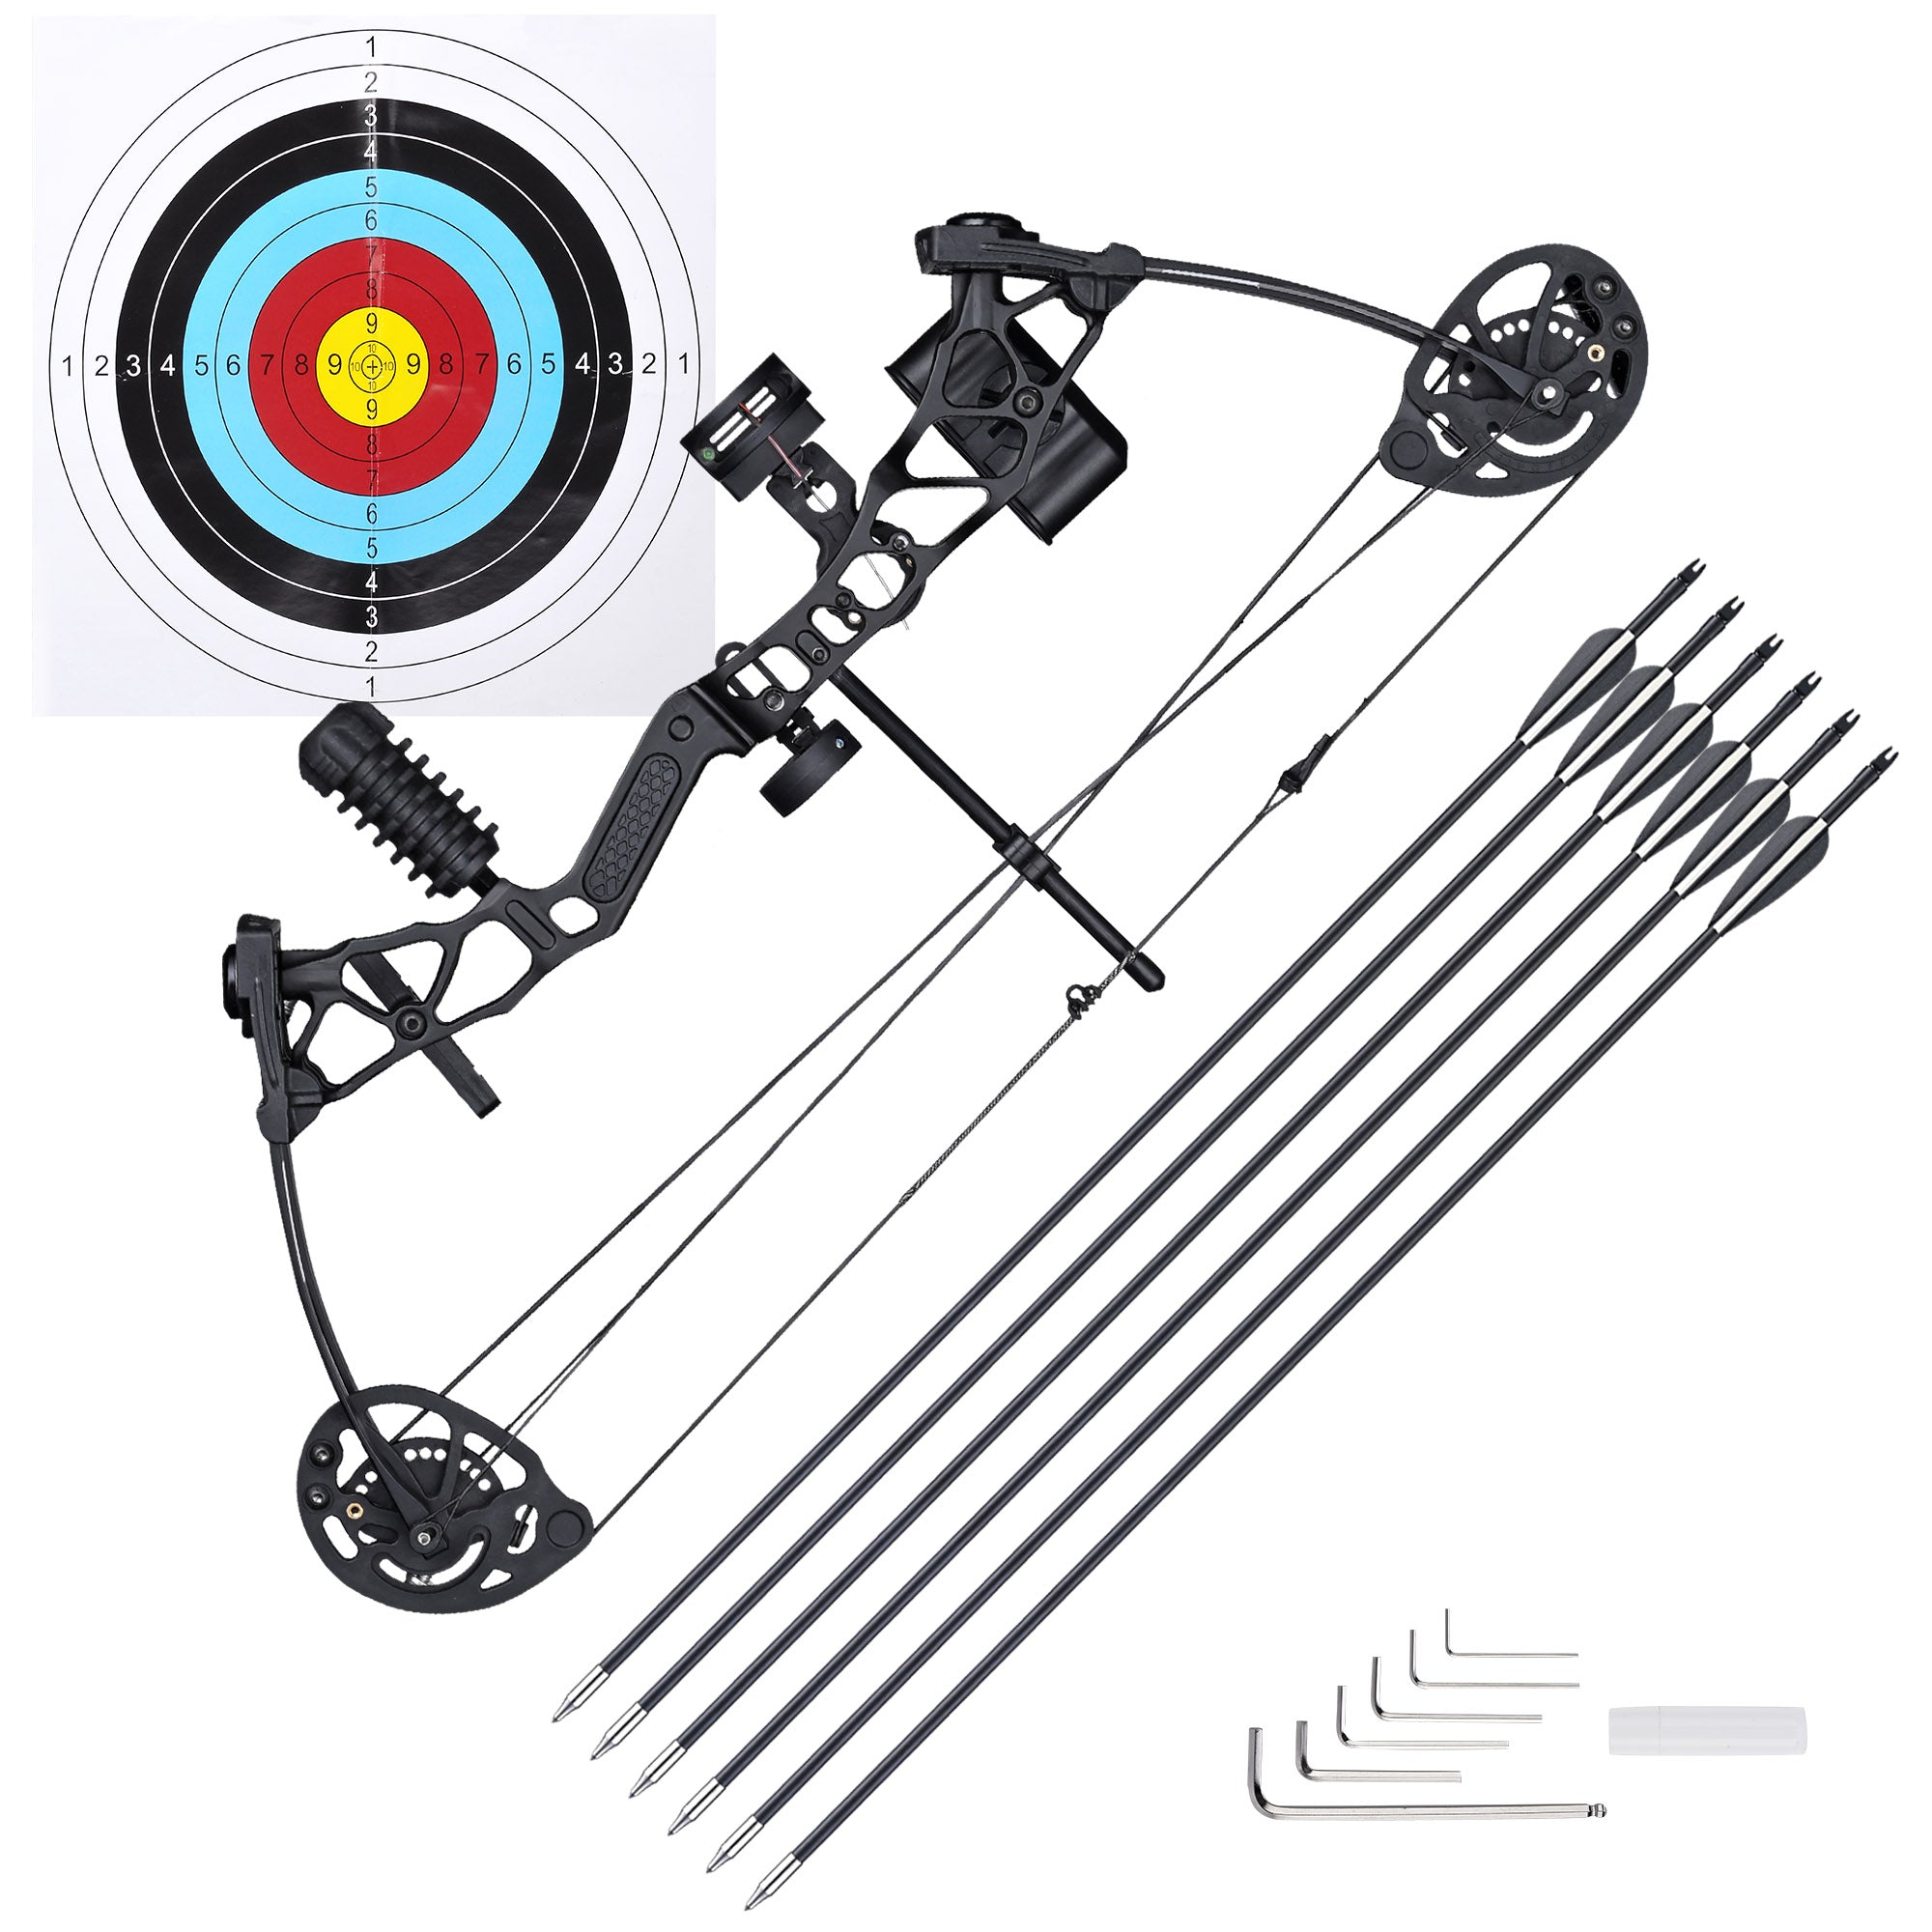 ZhengZ Arrow Targets for Shooting Outdoor Straw Archery Targets1 Layer 19.6 Inch Straw Arrow Target Four-Colors Handmade for Recurve Bow Longbow or Compound Bow 